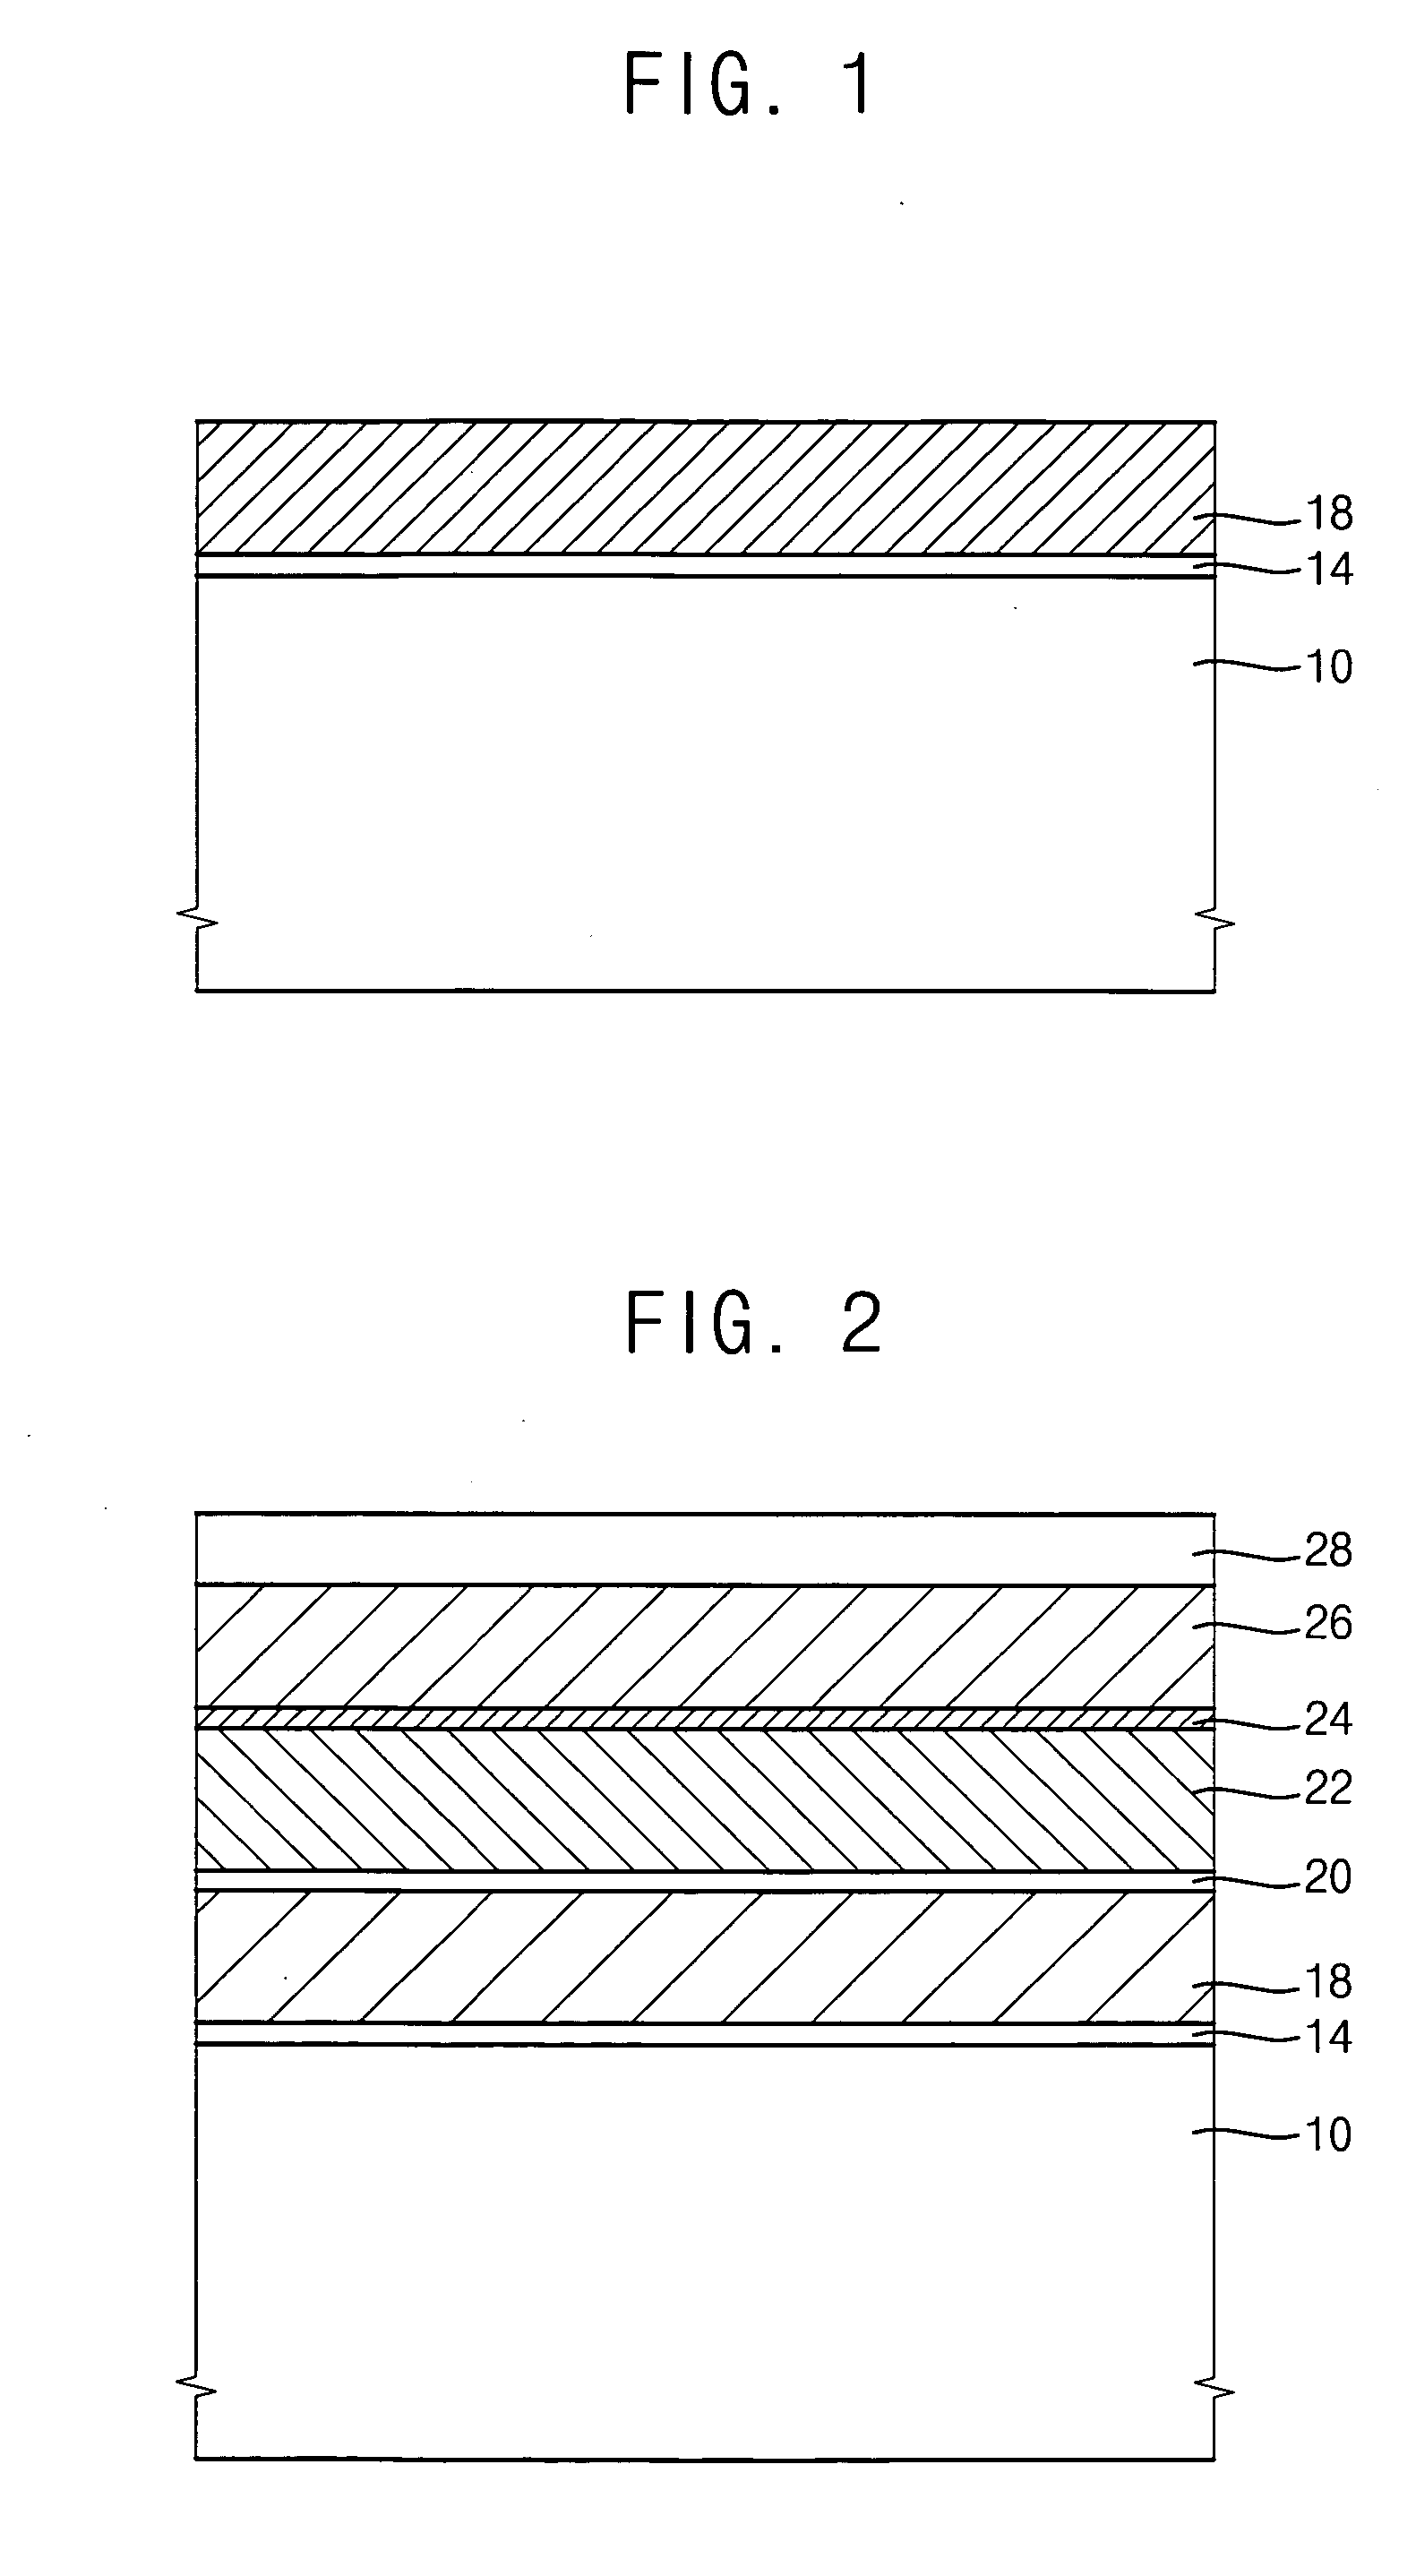 Method of forming a gate of a semiconductor device